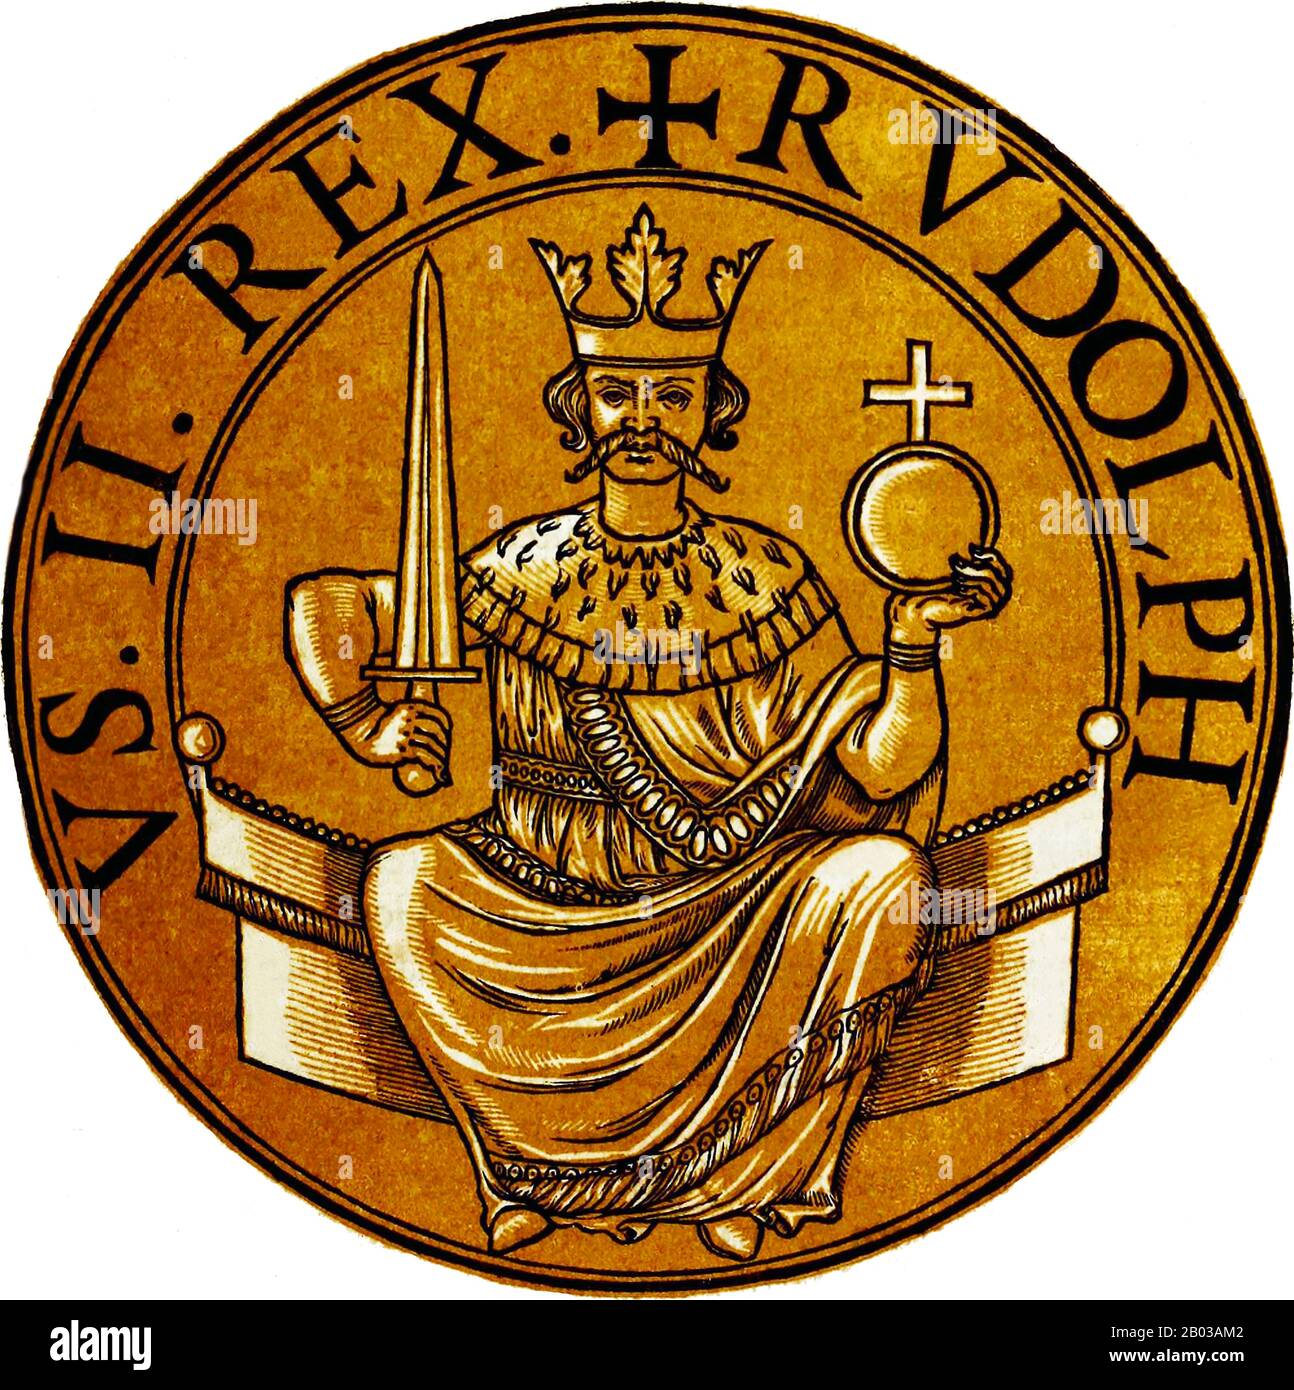 Rudolf I (1218-1291), also known as Rudolf of Habsburg, was the son of Count Albert IV of Habsburg, and became count after his father's death in 1239. His godfather was Emperor Frederick II, to whom he paid frequent court visits. Rudolf ended the Great Interregnum that had engulfed the Holy Roman Empire after the death of Frederick when he was elected as King of Germany in 1273. Stock Photo